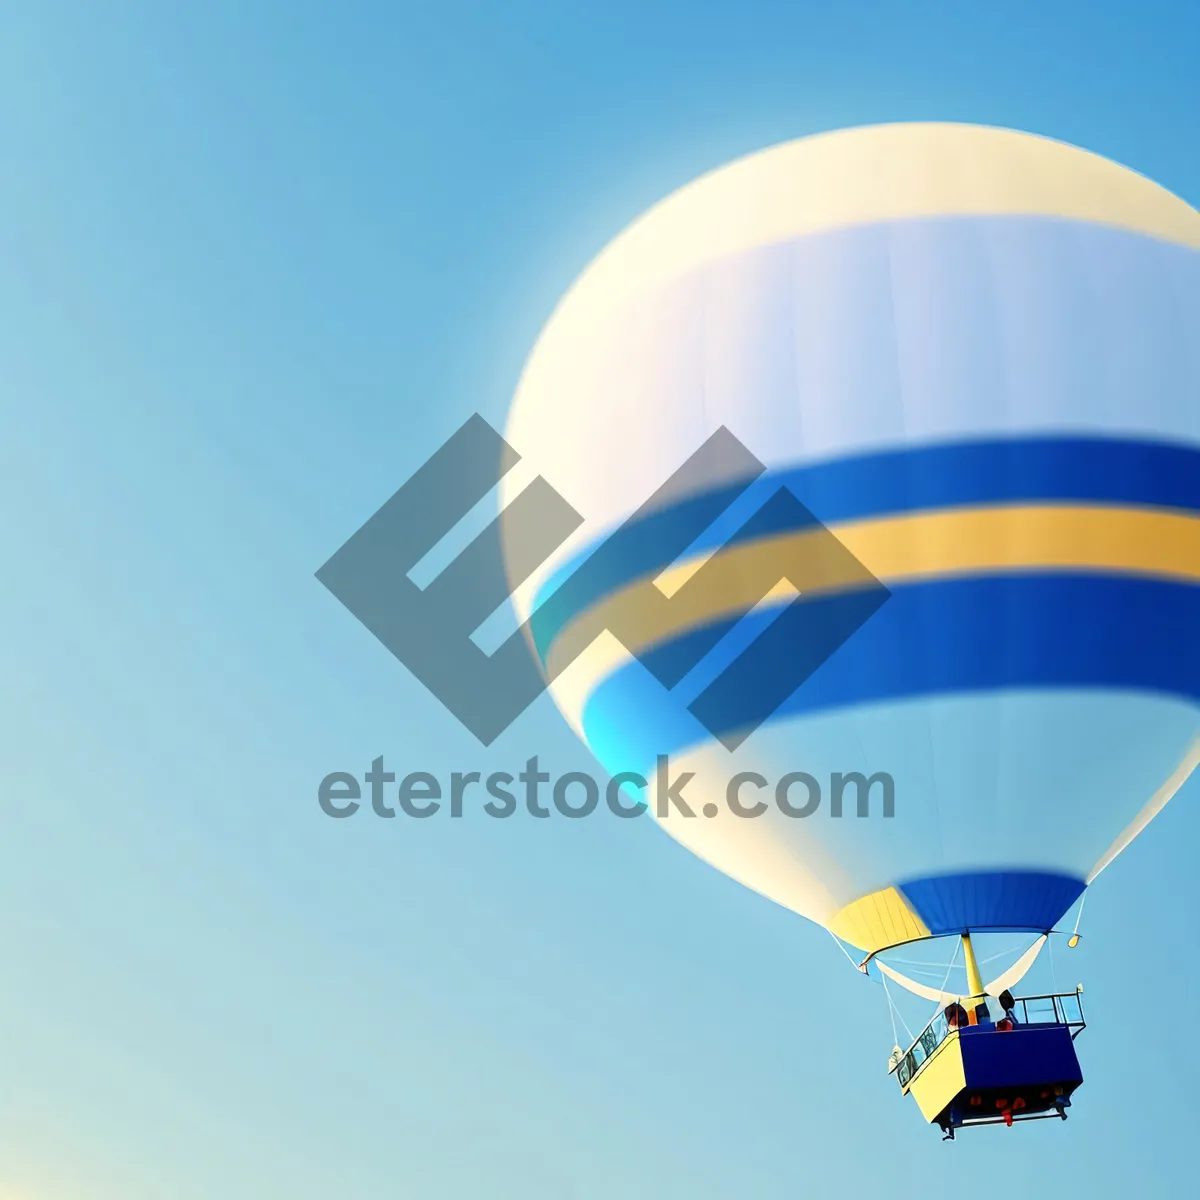 Picture of Colorful Hot Air Balloon Soaring Through the Sky